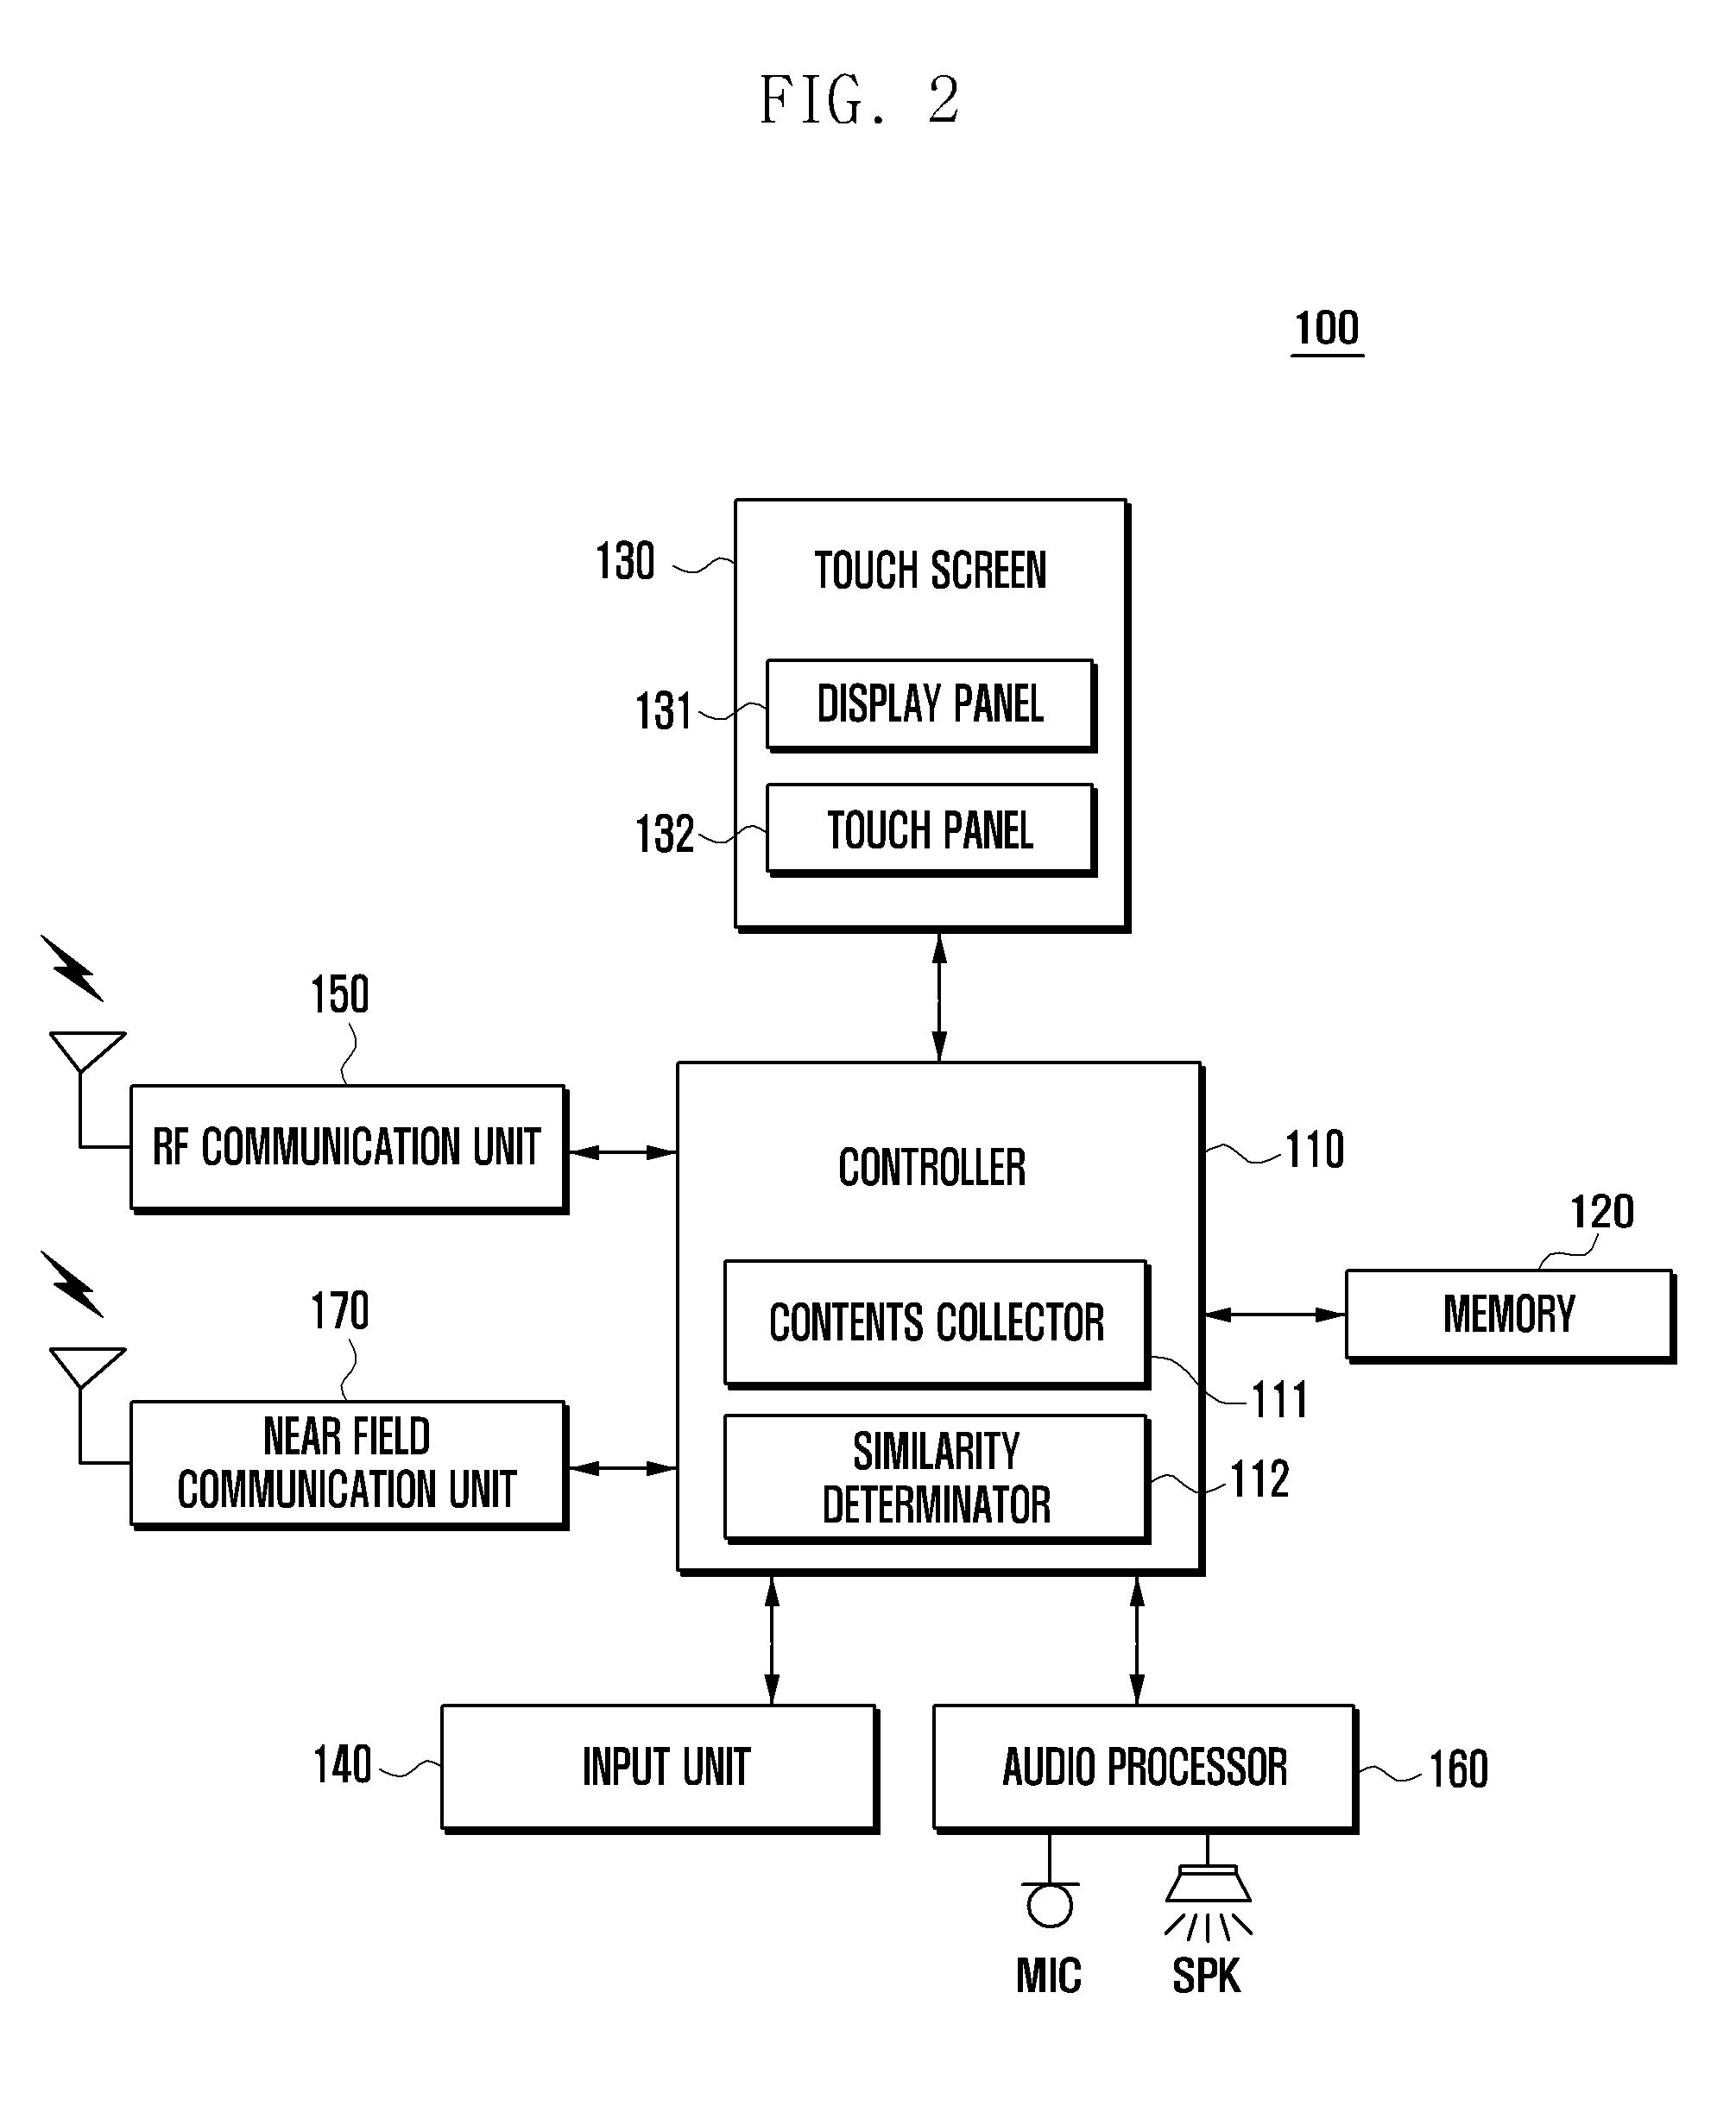 Method and apparatus for integratedly managing contents in portable terminal